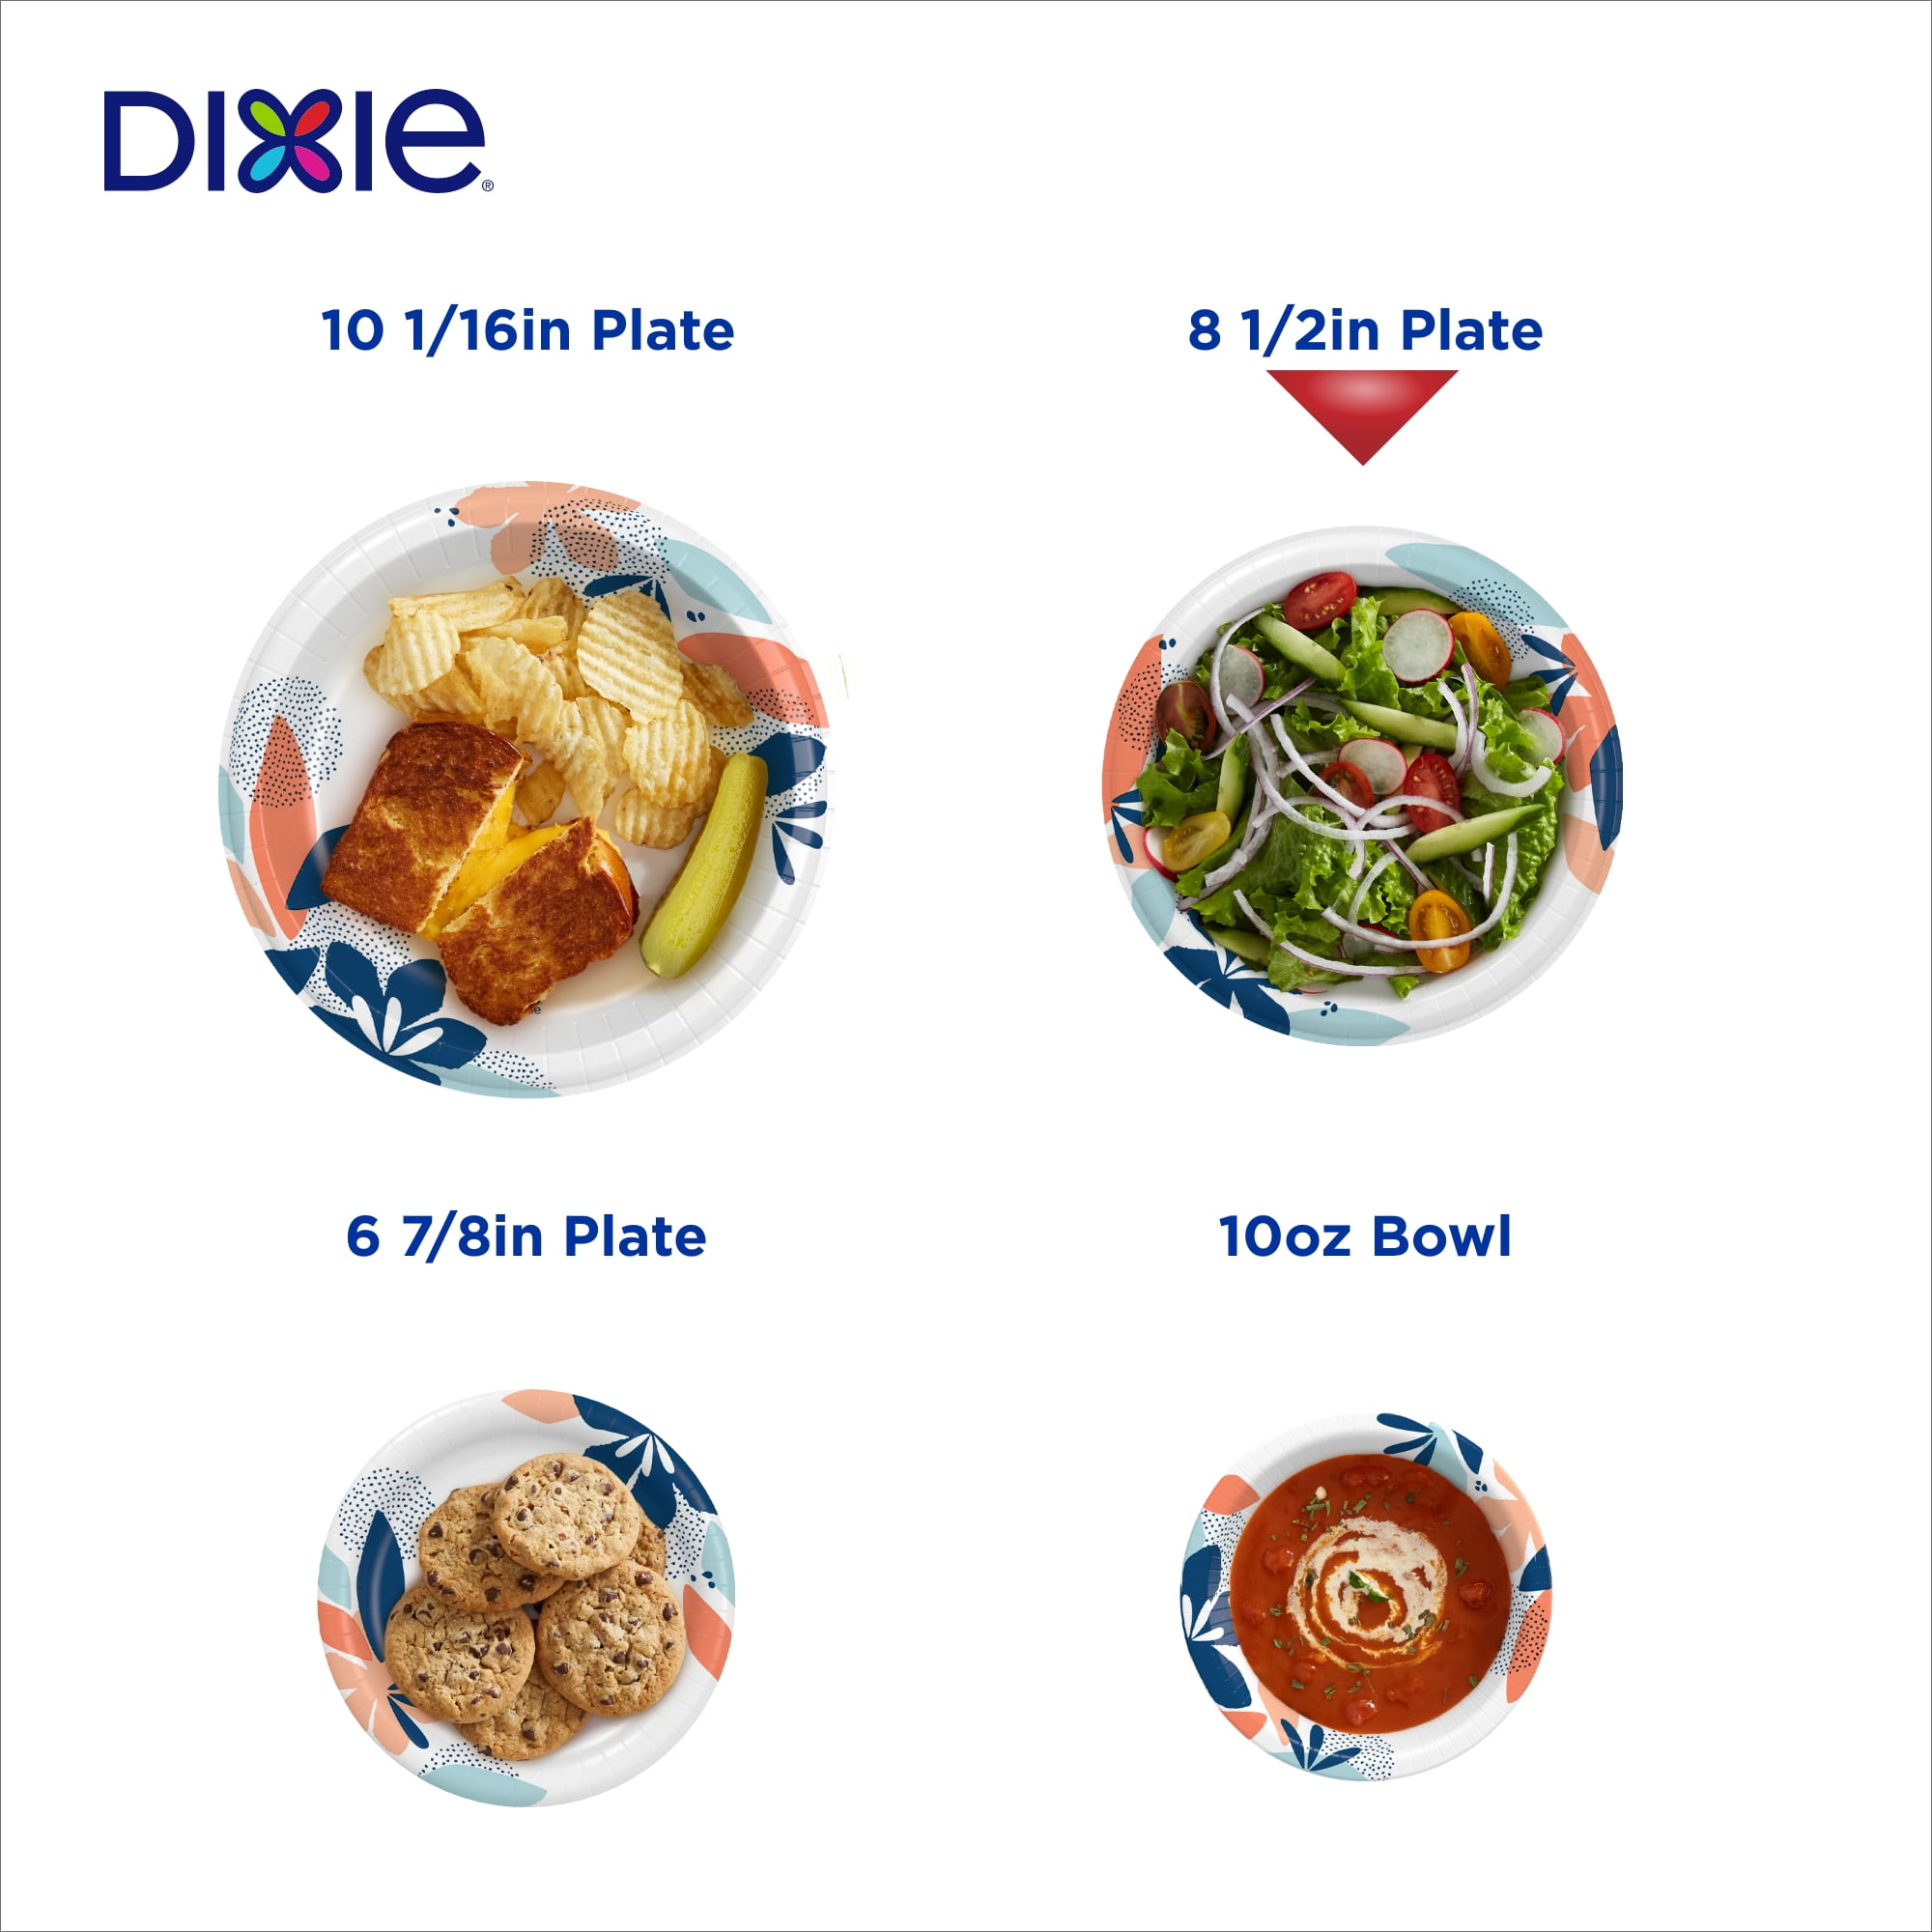 Dixie Disposable Paper Plates, Multicolor, 8.5 in, 100 Count 